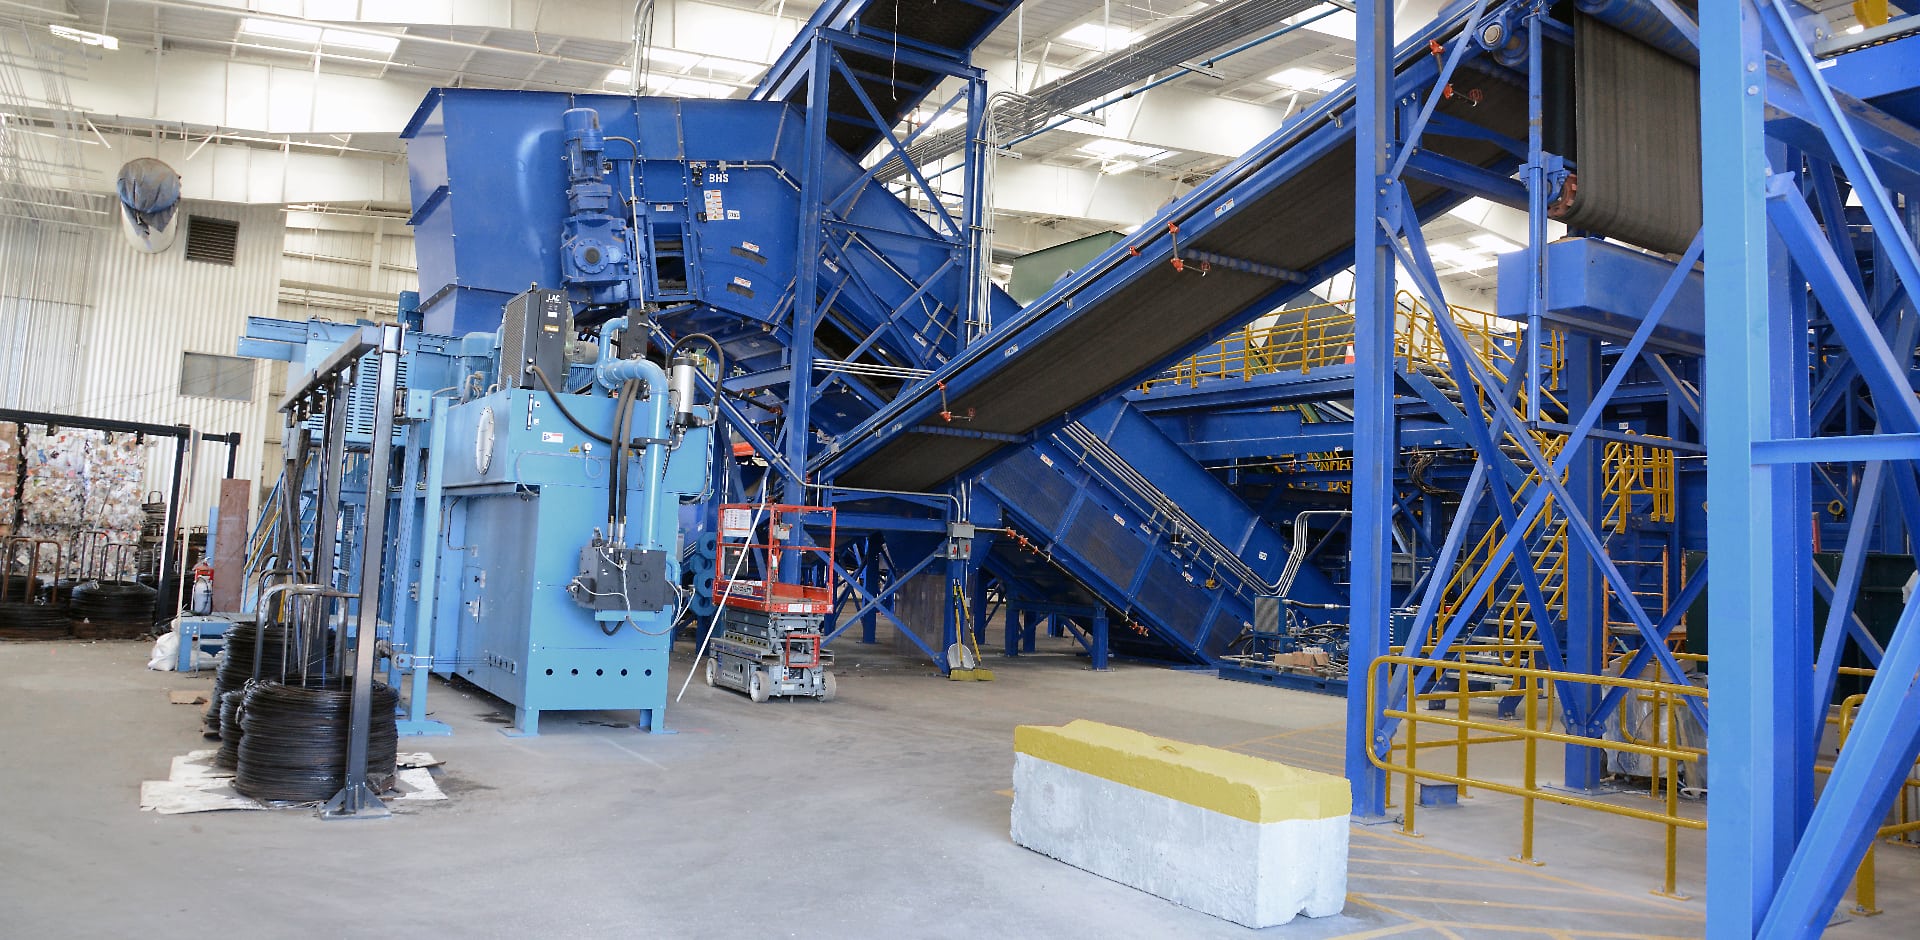 Photo Of A Warehouse With Large Blue Industrial Equipment